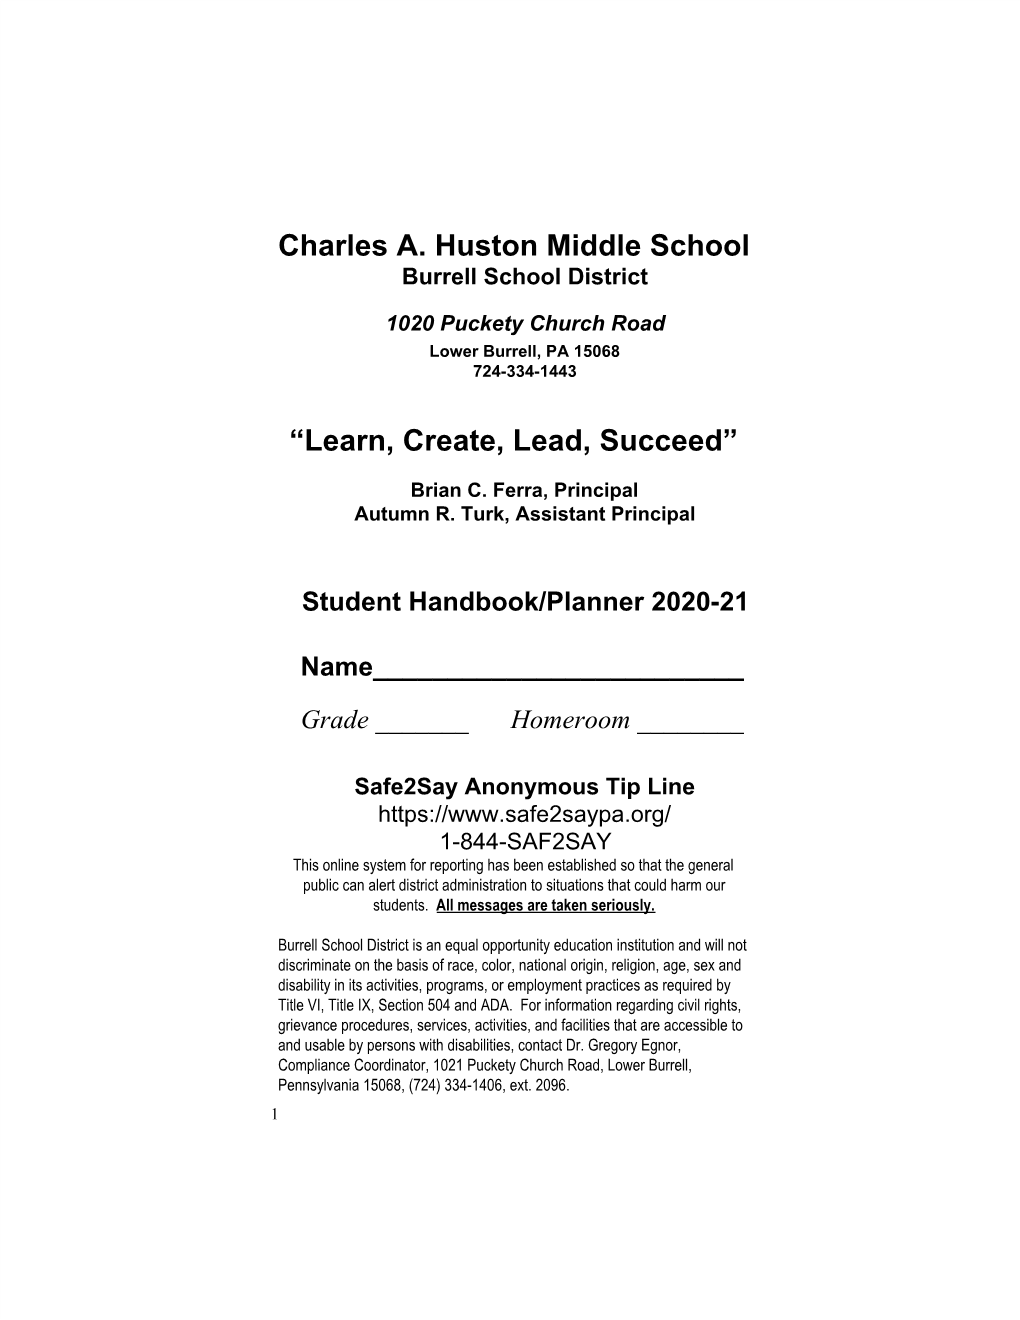 Charles A. Huston Middle School “Learn